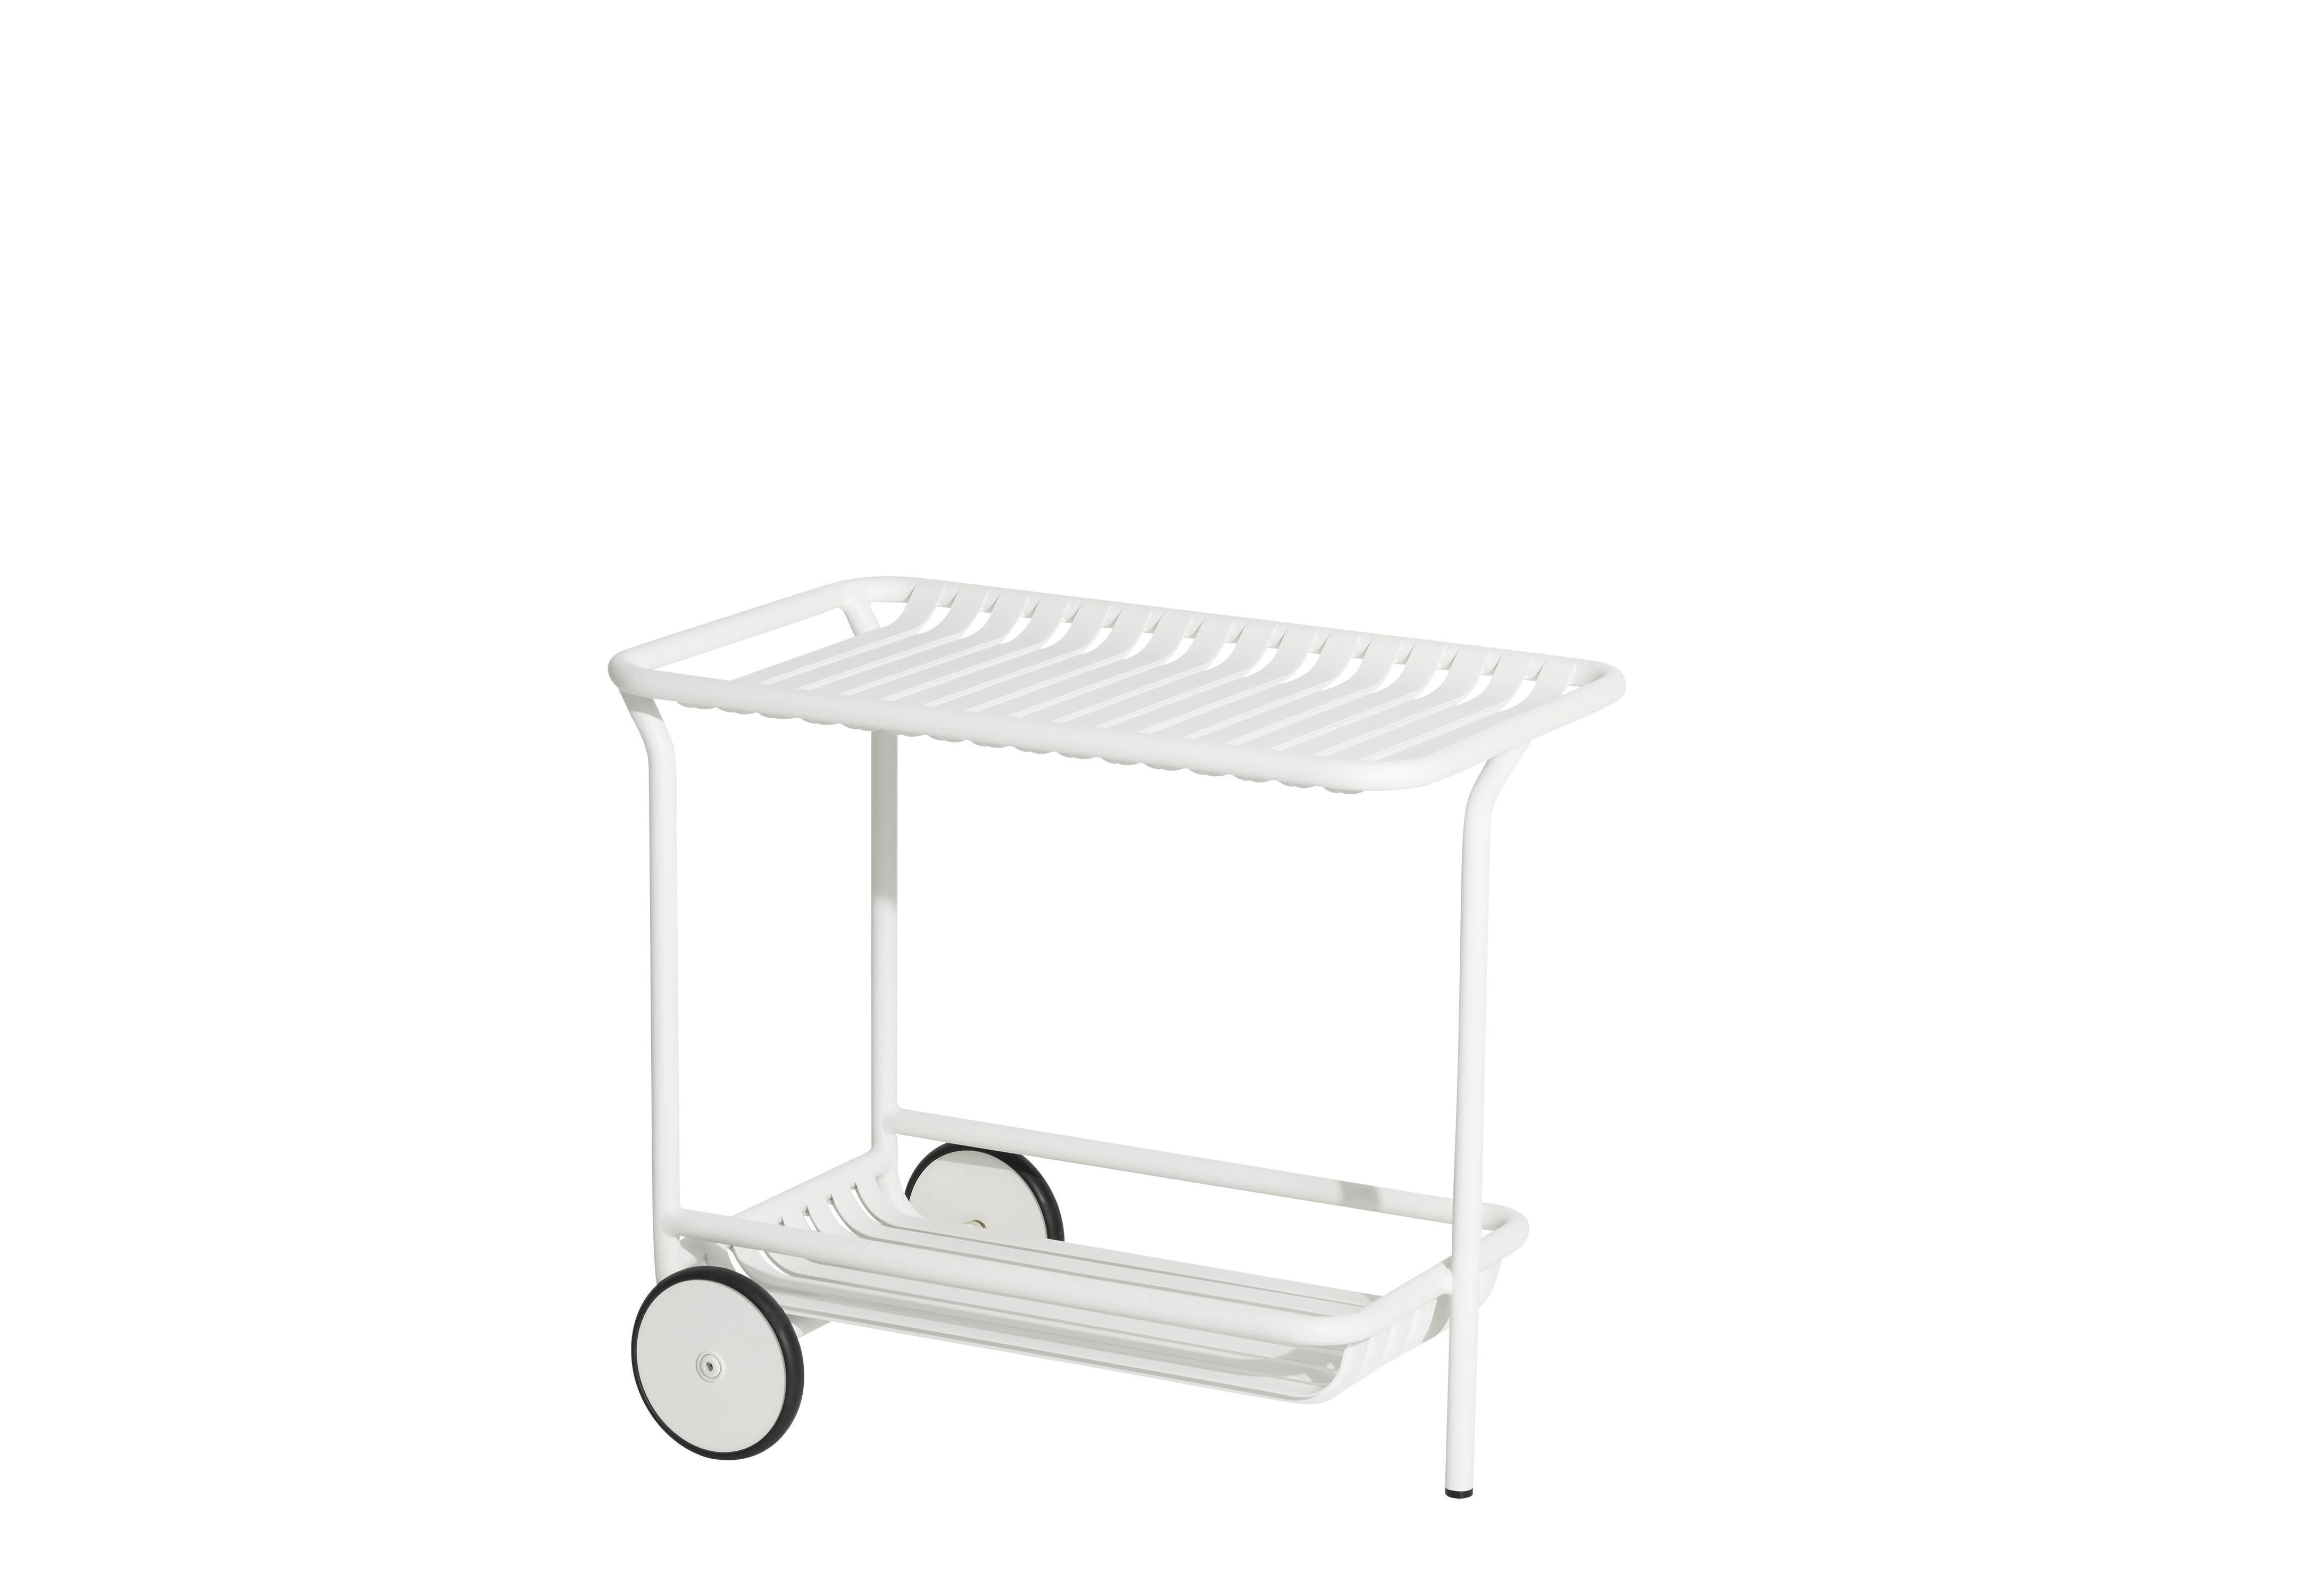 Petite Friture Week-End Trolley in White Aluminium by Studio BrichetZiegler, 2017

The week-end collection is a full range of outdoor furniture, in aluminium grained epoxy paint, matt finish, that includes 18 functions and 8 colours for the retail